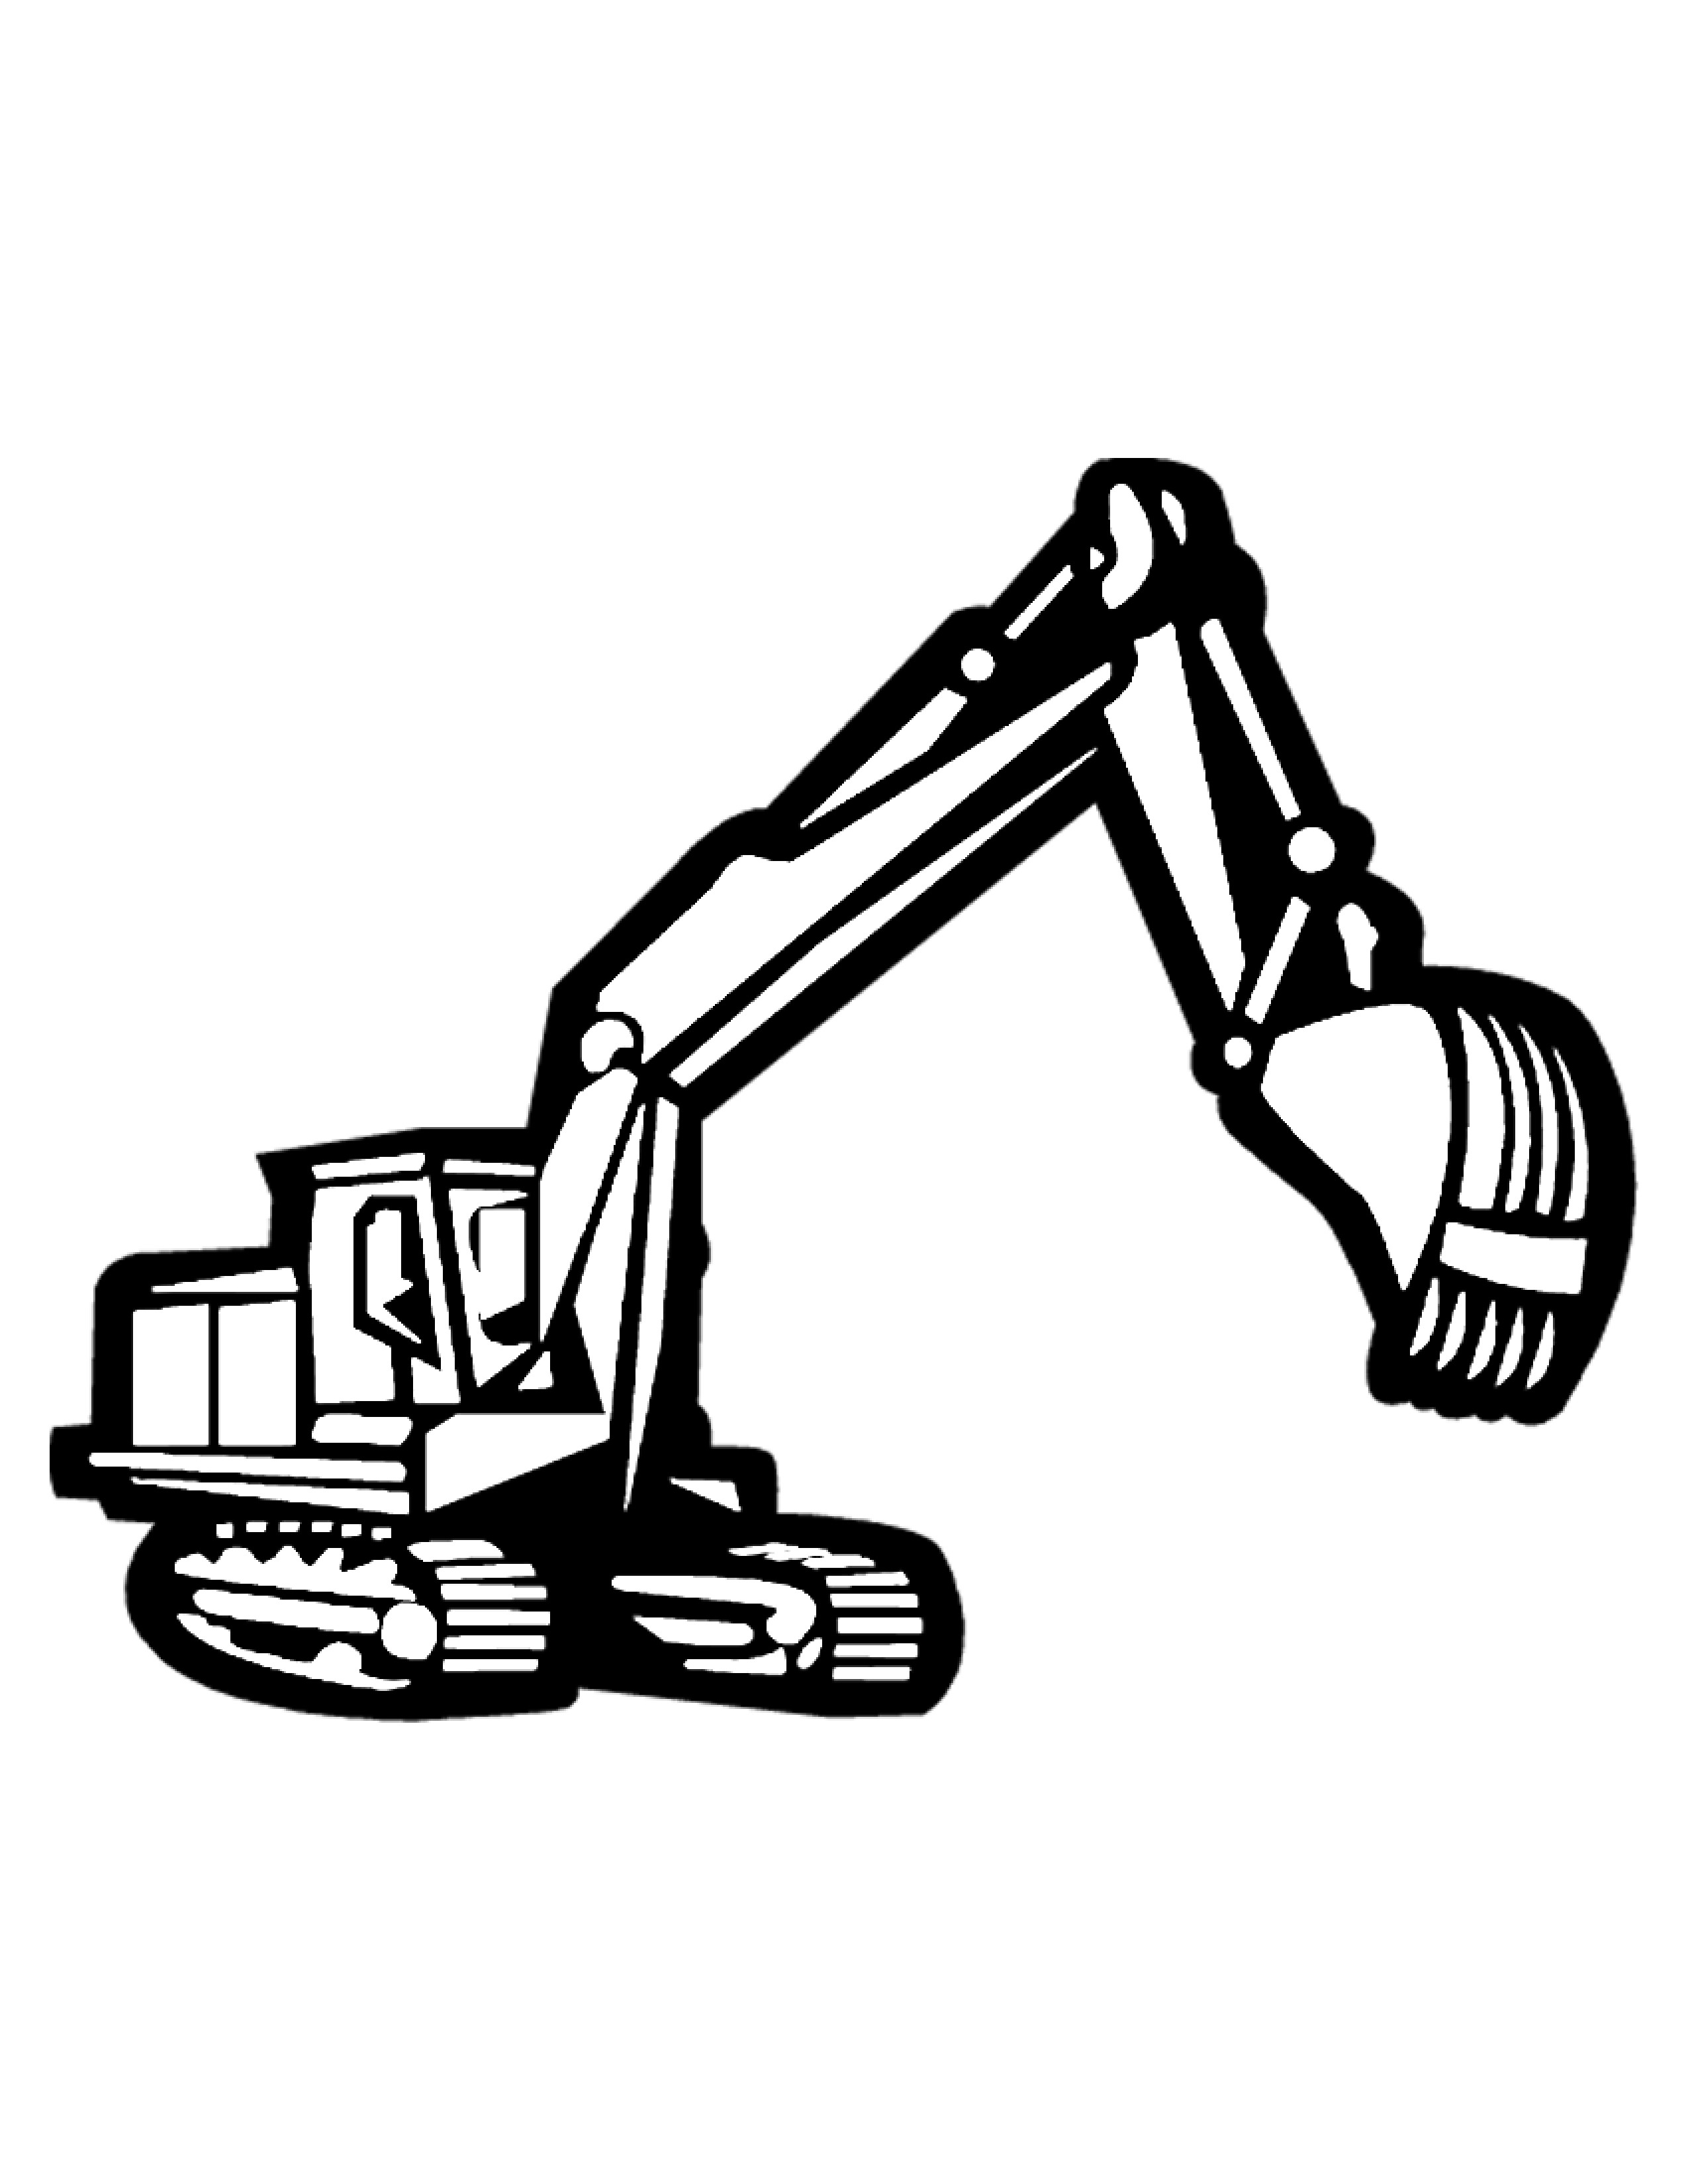 Construction Equipment Coloring Pages - Free ...